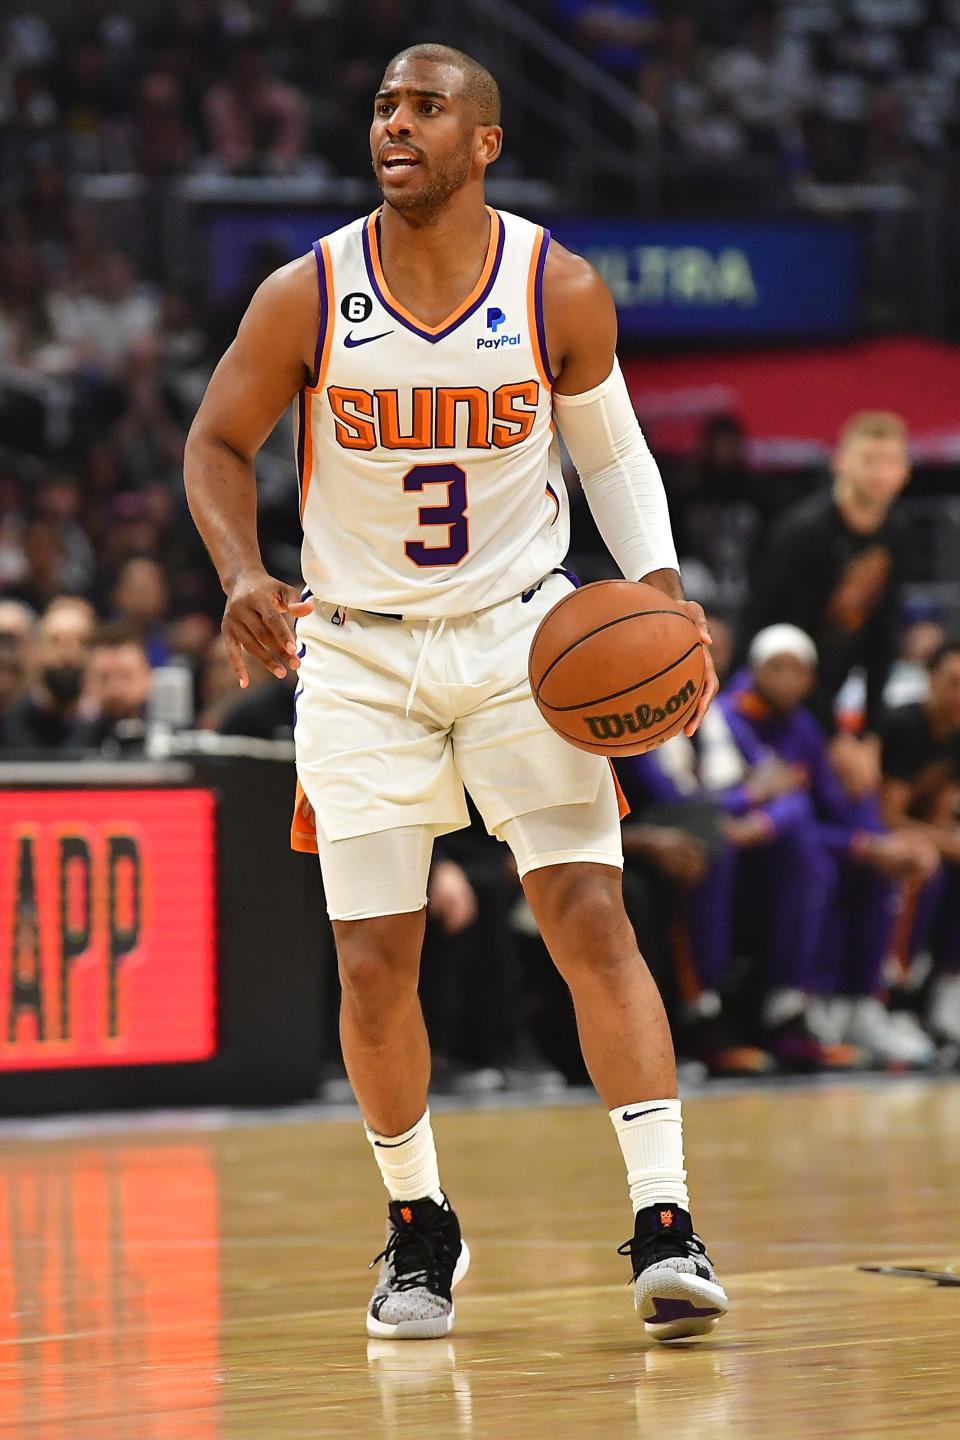 Chris Paul delivered for the Phoenix Suns in Game 4 of their NBA Playoffs series against the Los Angeles Clippers.